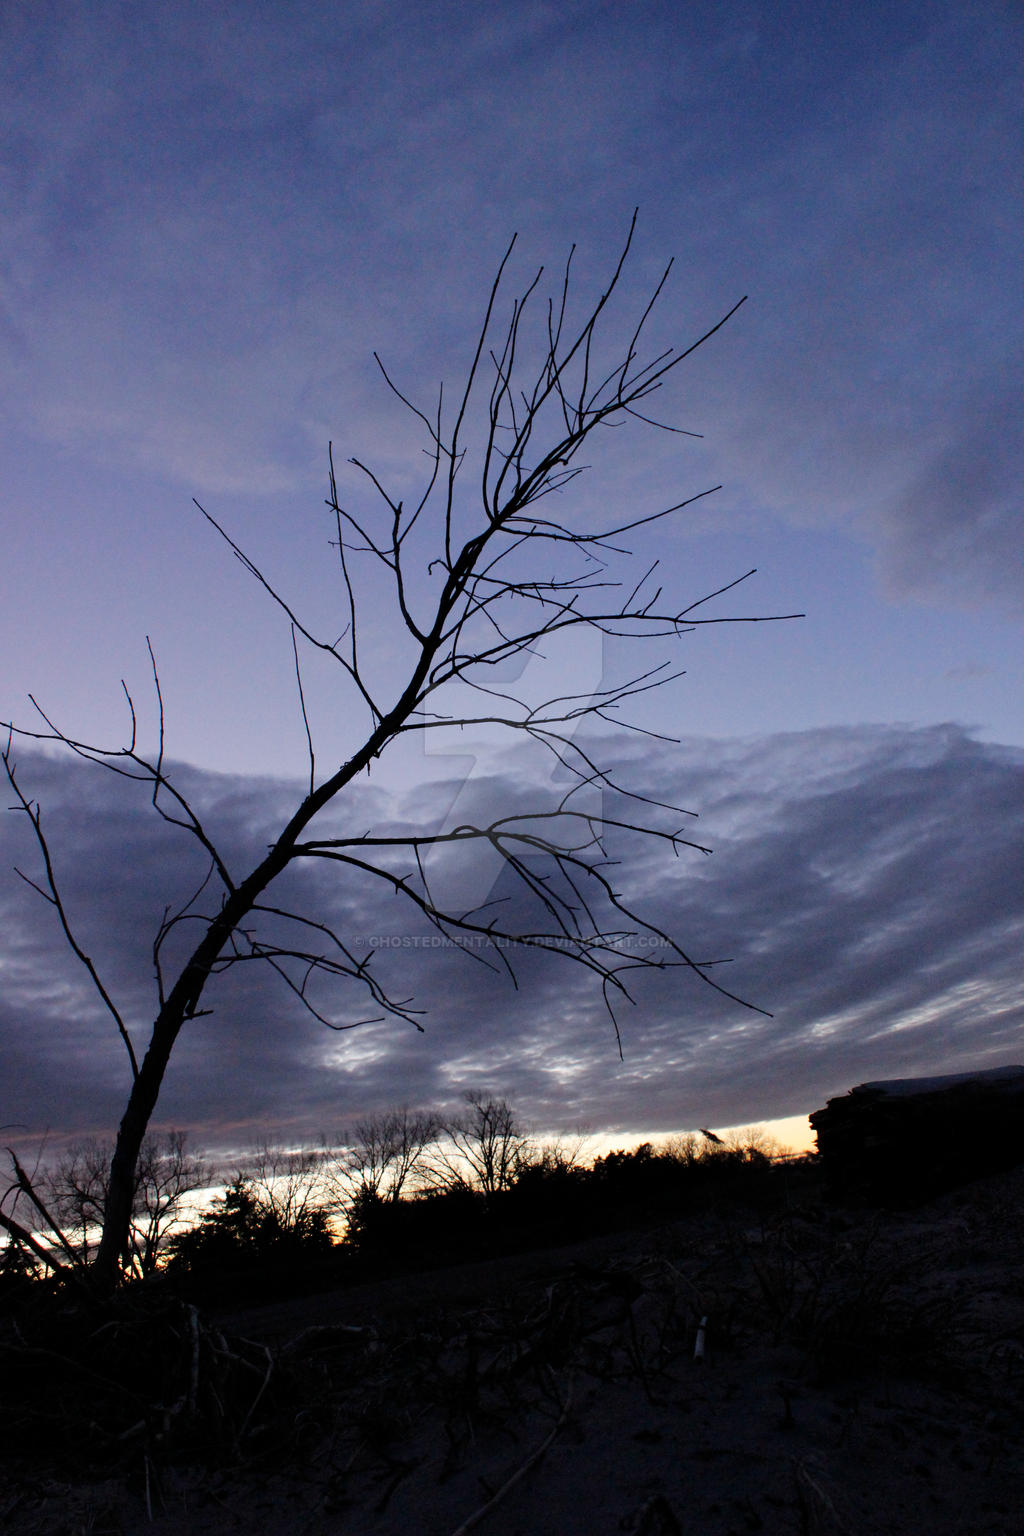 Sunset Branches by Ghostedmentality on DeviantArt